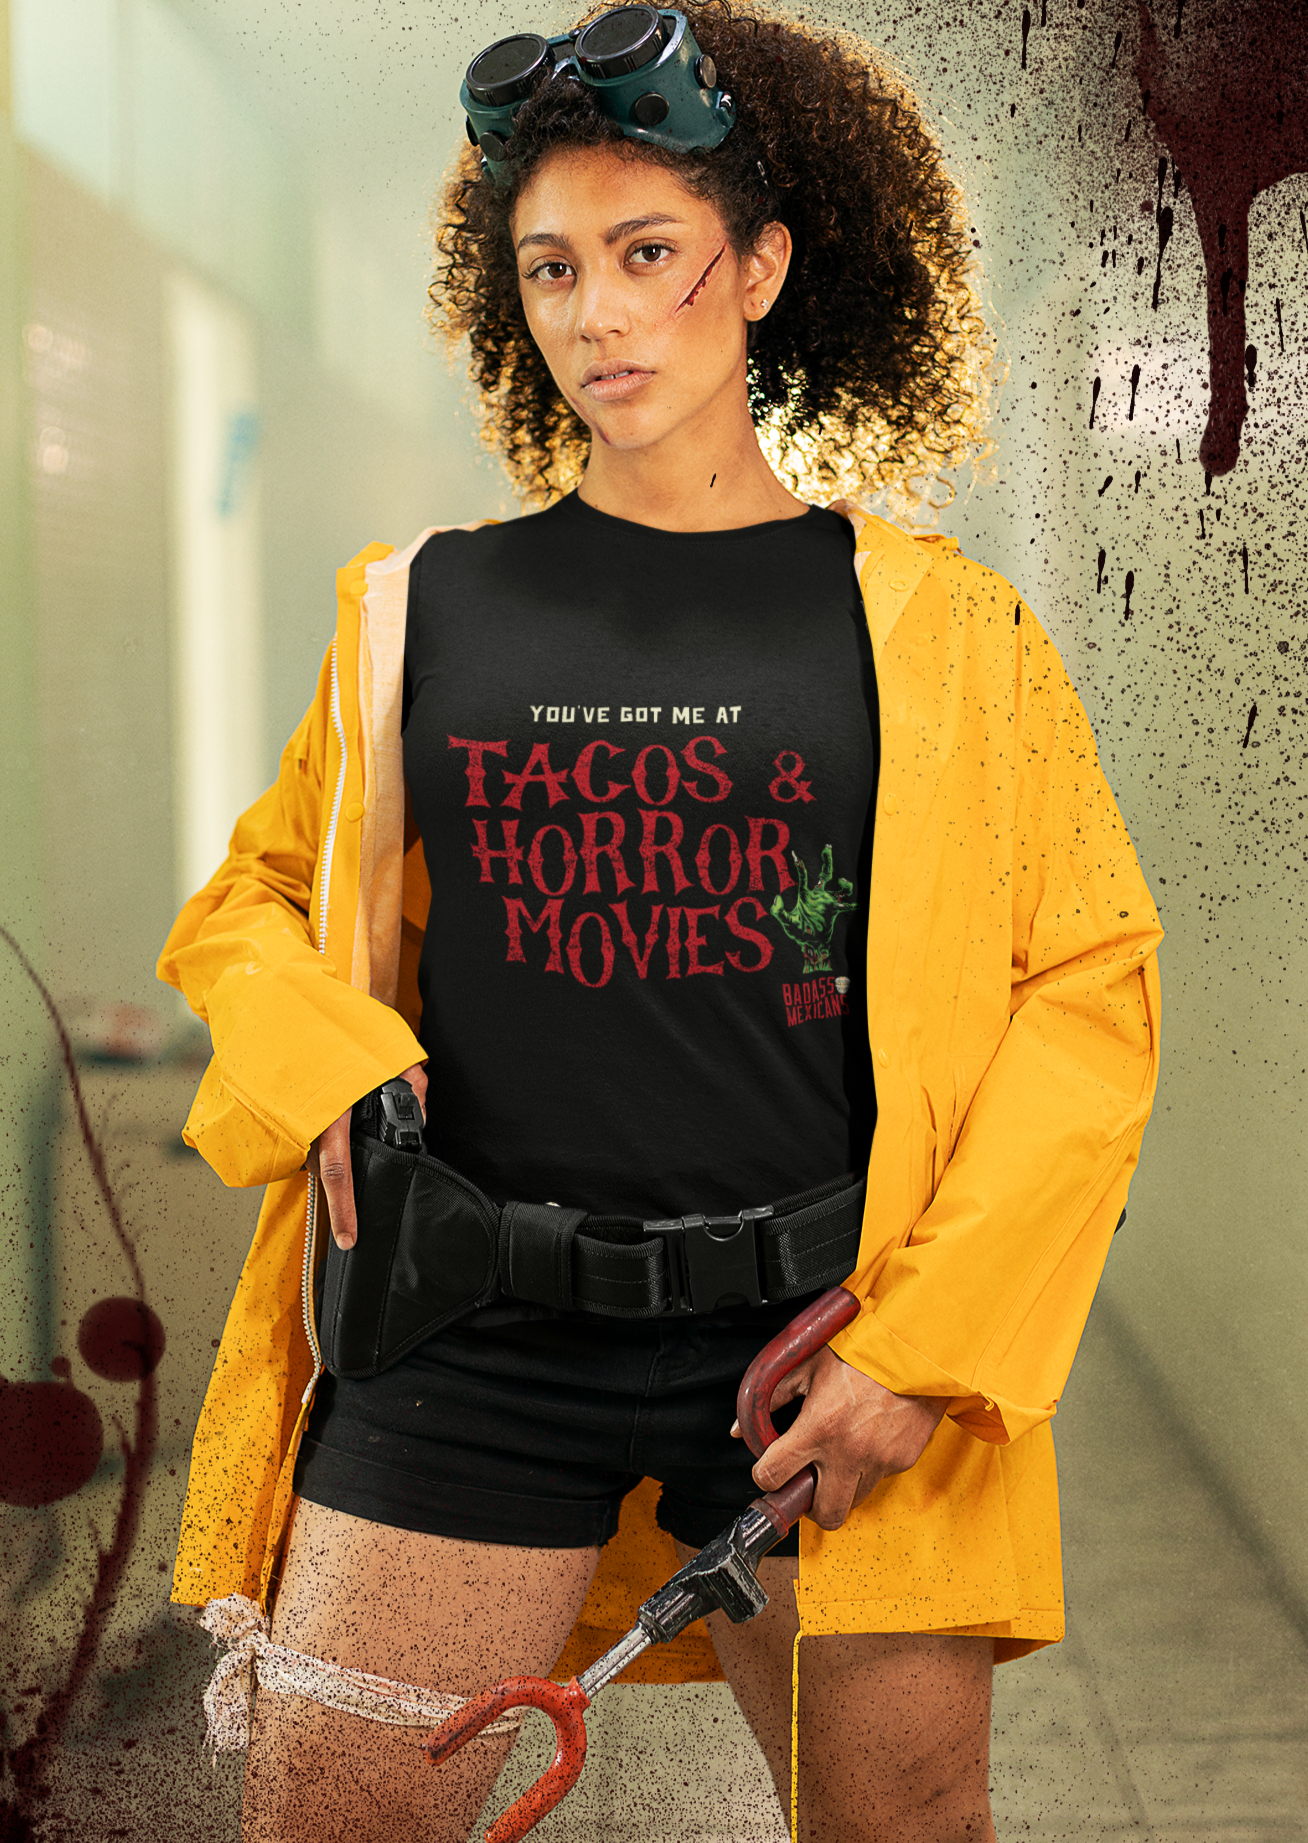 Tacos and Horror Movies women t shirt